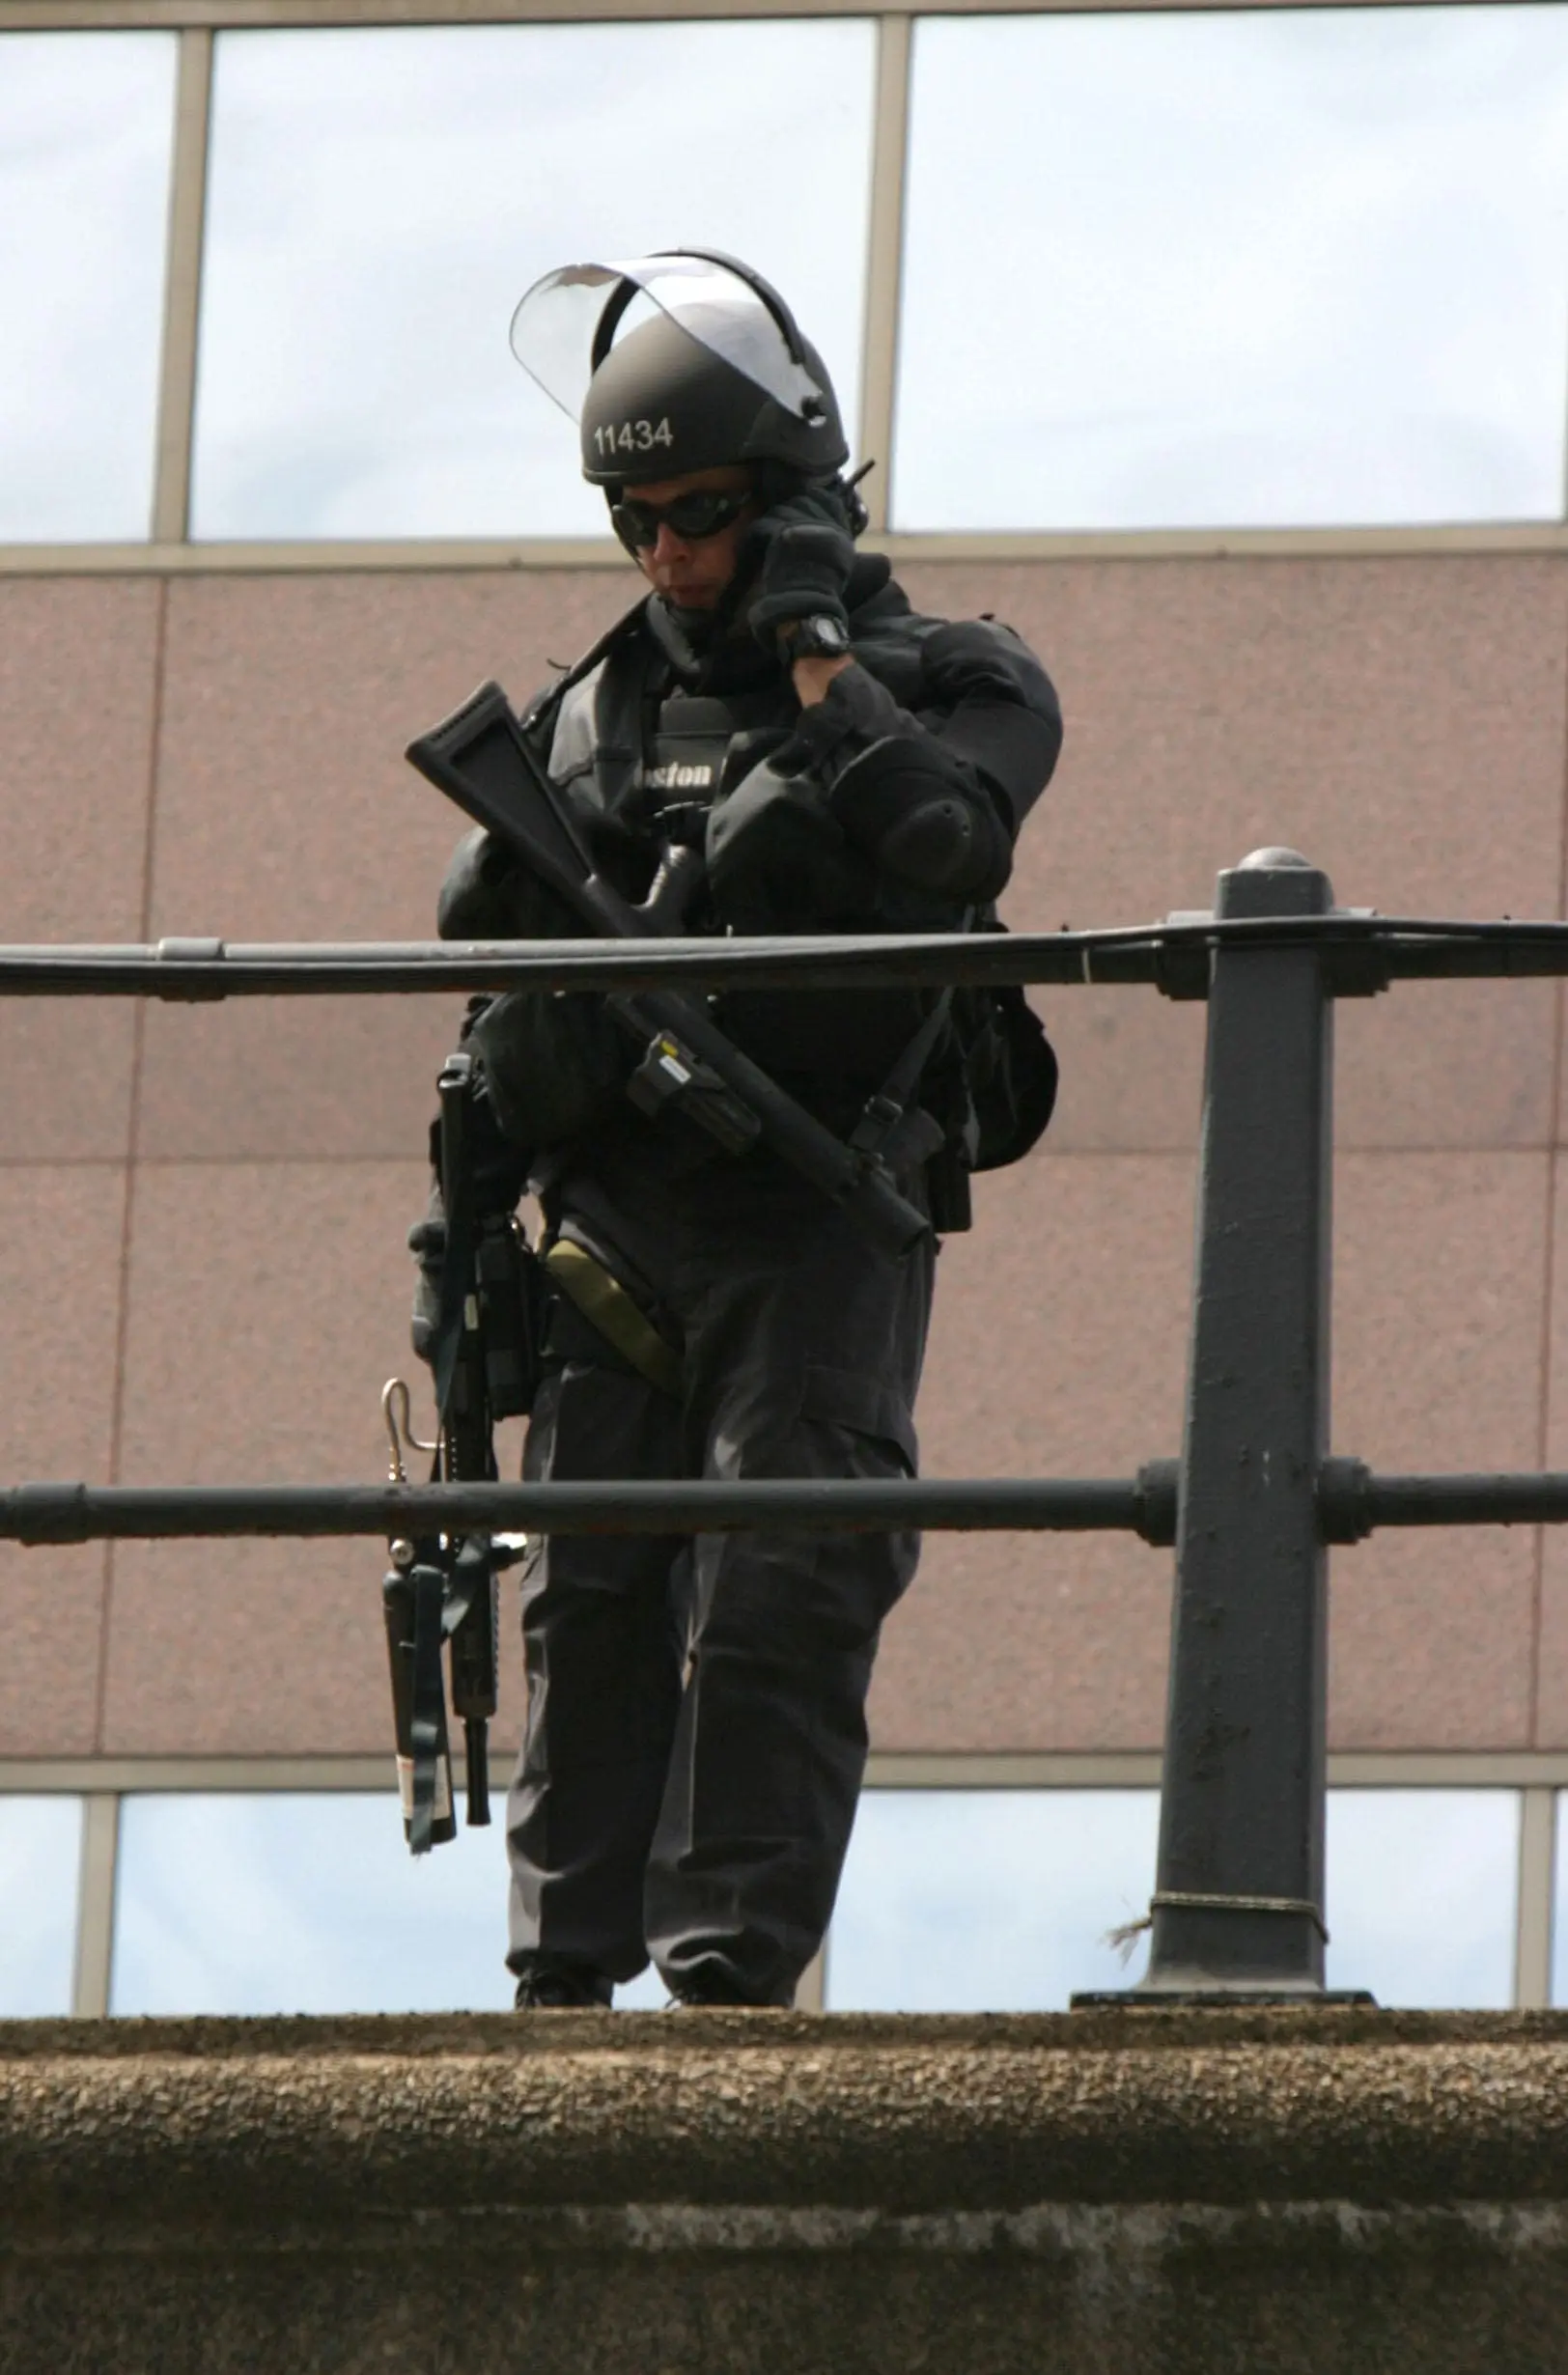 On the eve of the 2004 Democratic Convention in Boston, a Boston Police officer carries an FN303 as protesters demonstrate nearby.